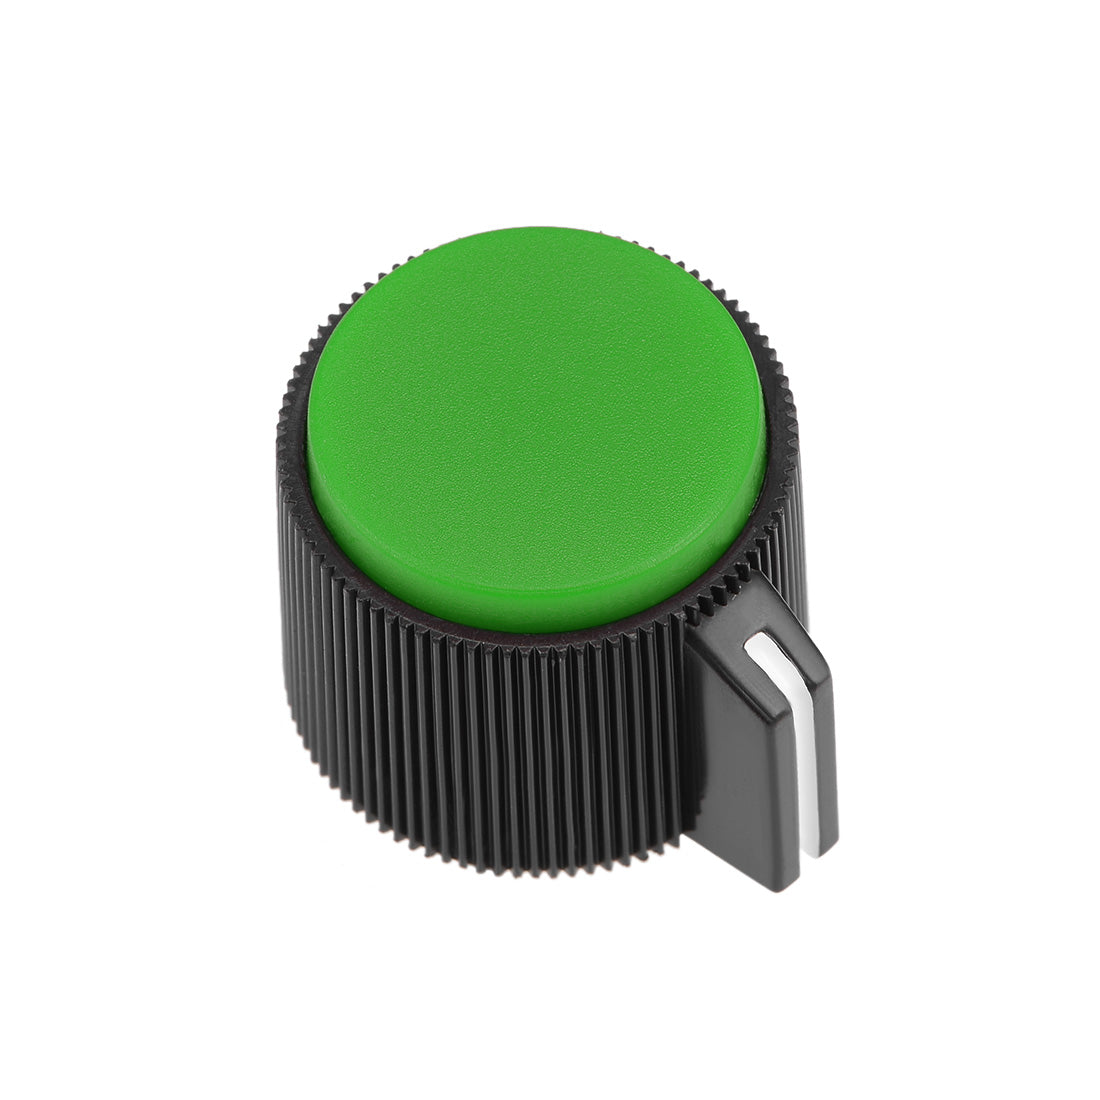 Uxcell Uxcell 2Pcs 19x16mm bachelite Potentiometer Volume Control Rotary Knob for 6mm Dia Hole Green